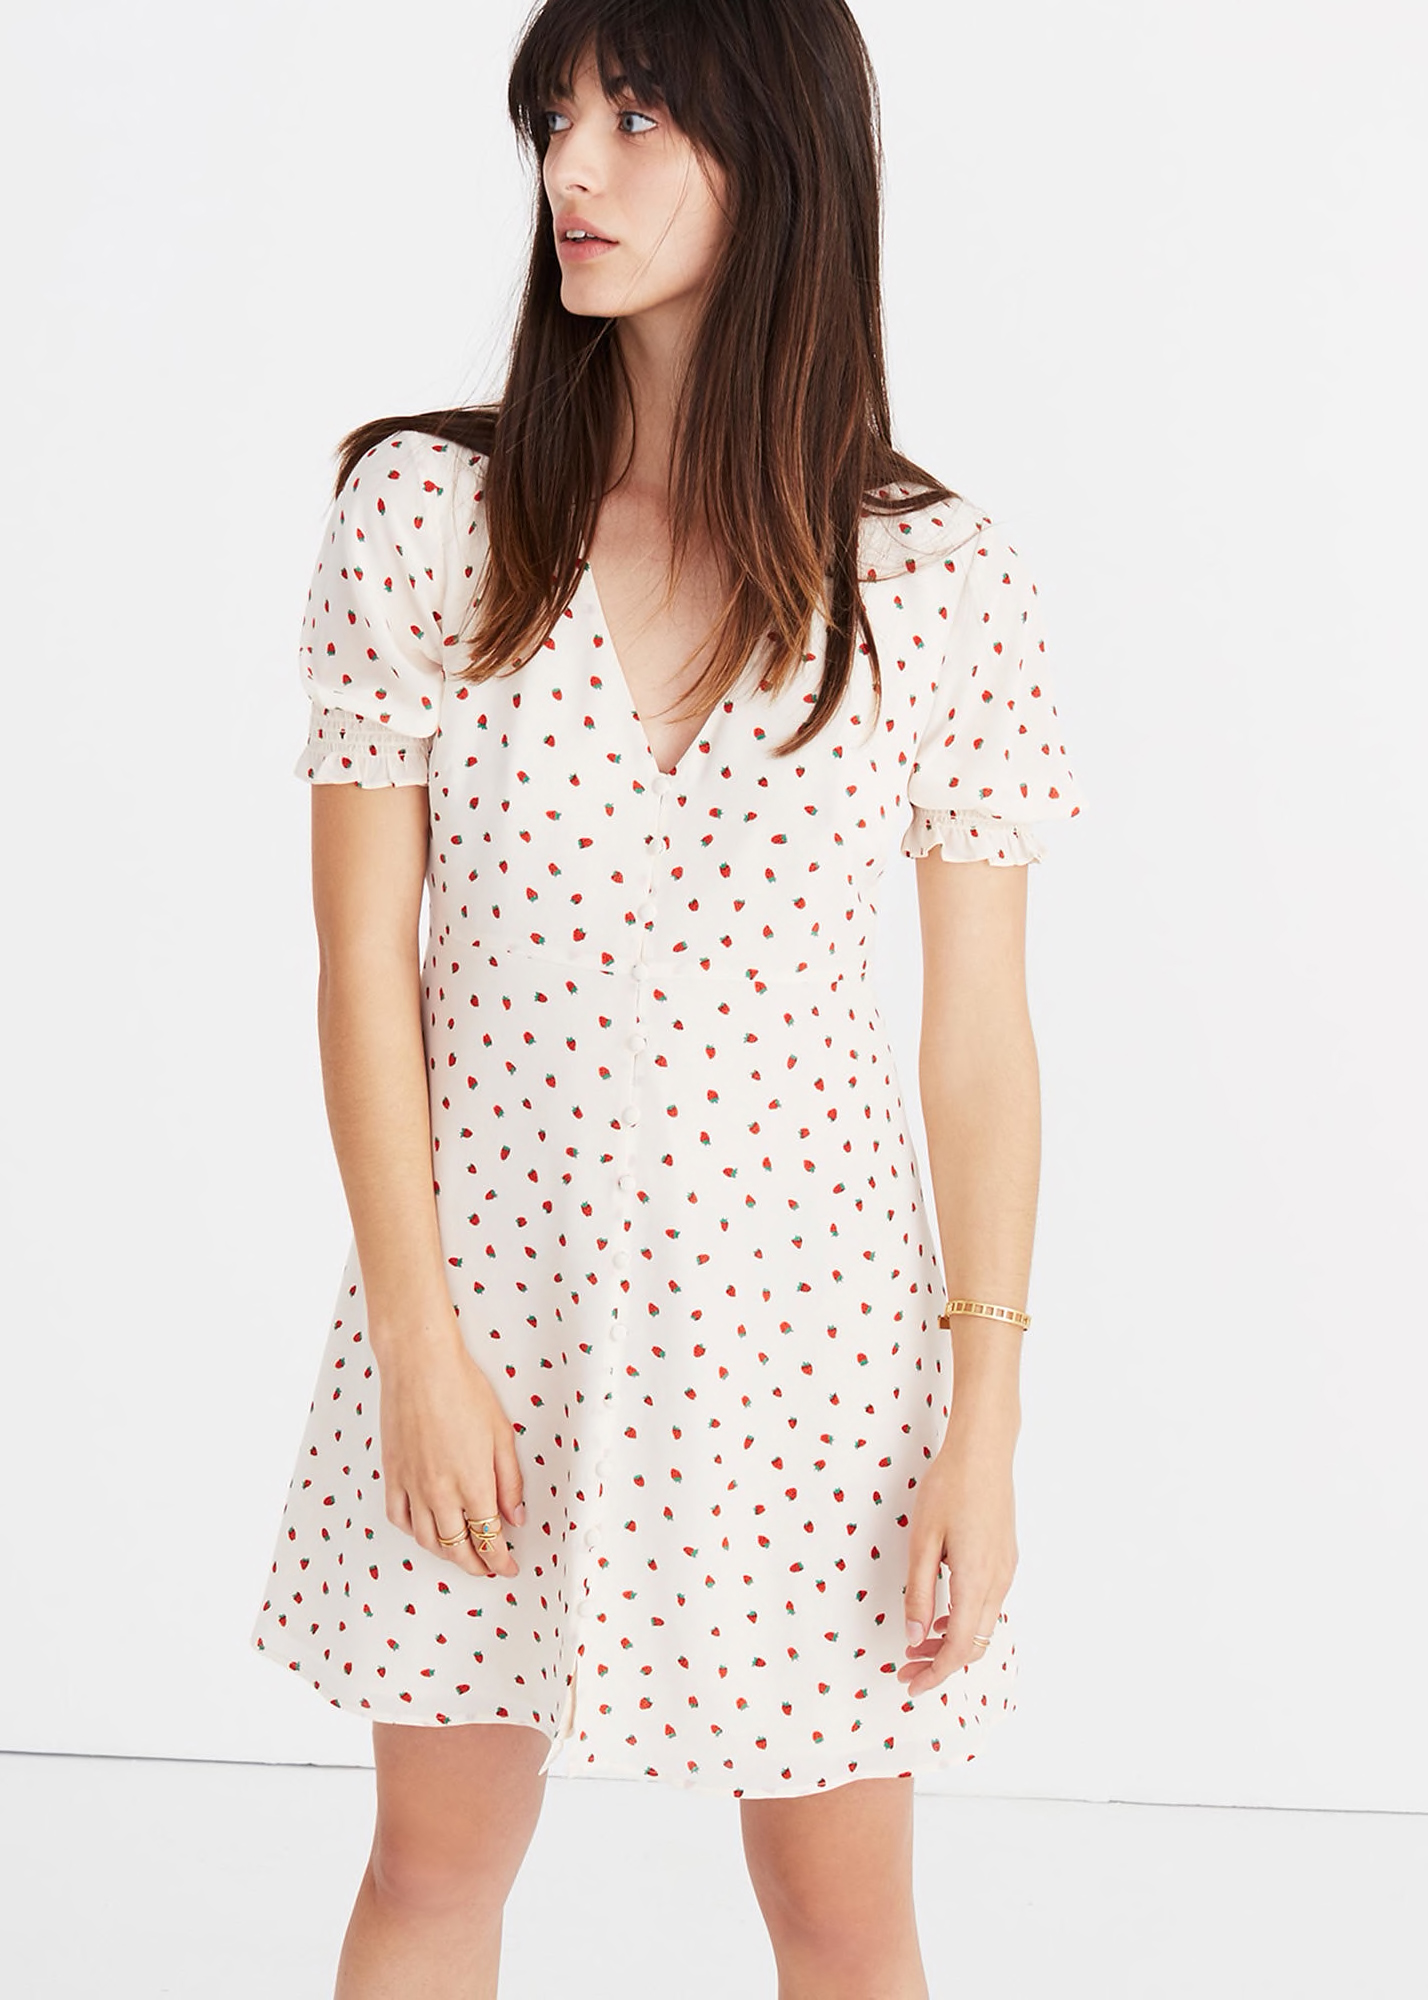 Memorial Day Sales Madewell: 20% off dresses with code PRETTYPLEASE